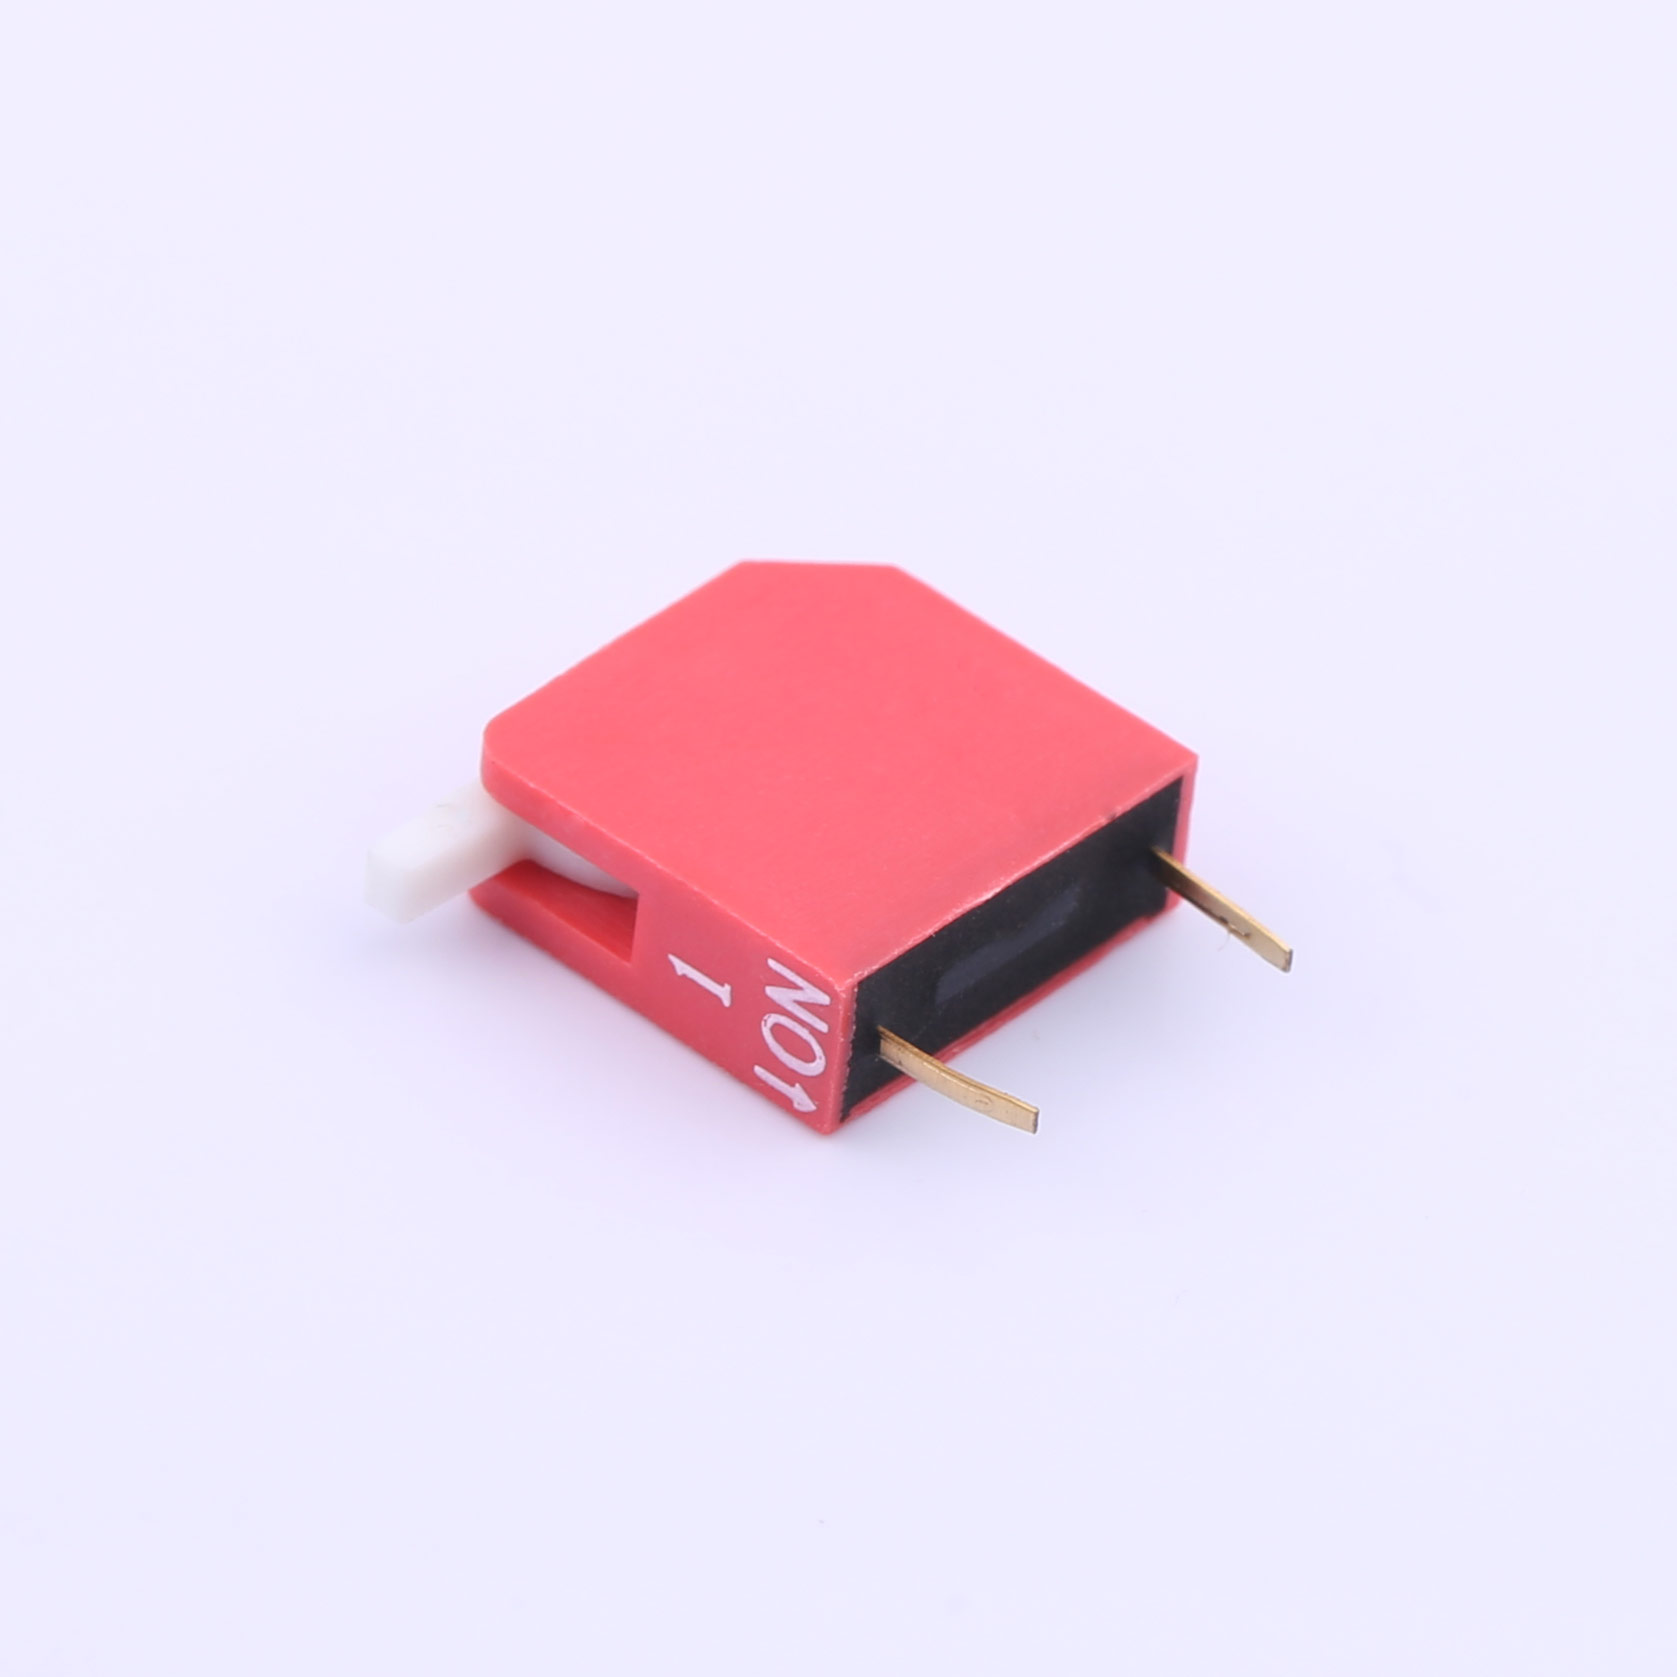 Kinghelm Pitch 2.54mm 1 Position Red Dip Switch 100mA 24V - KH-1002-CB2.54-1P